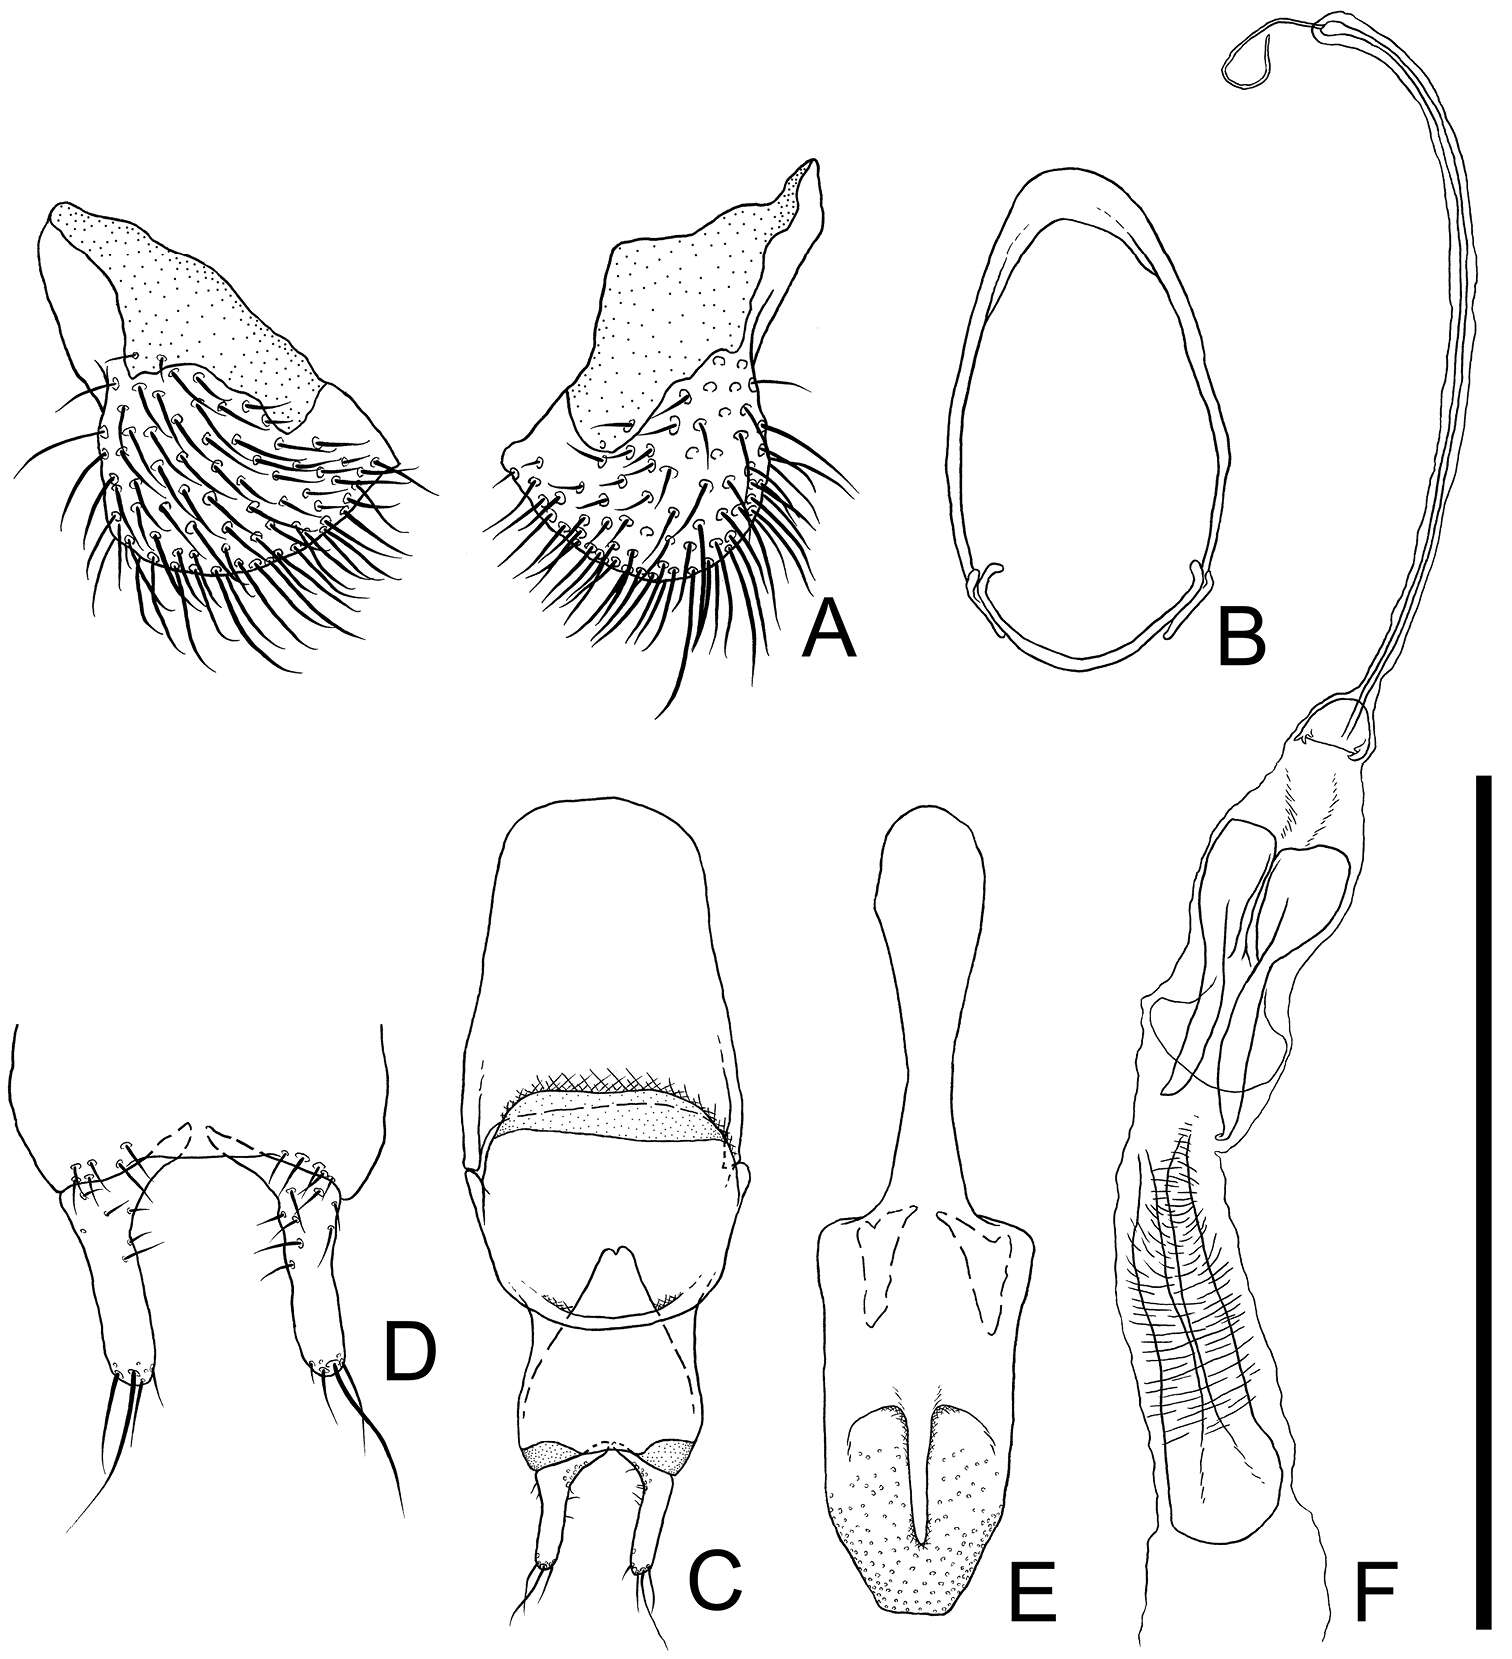 Image of Cryptamorpha sculptifrons Reitter 1889